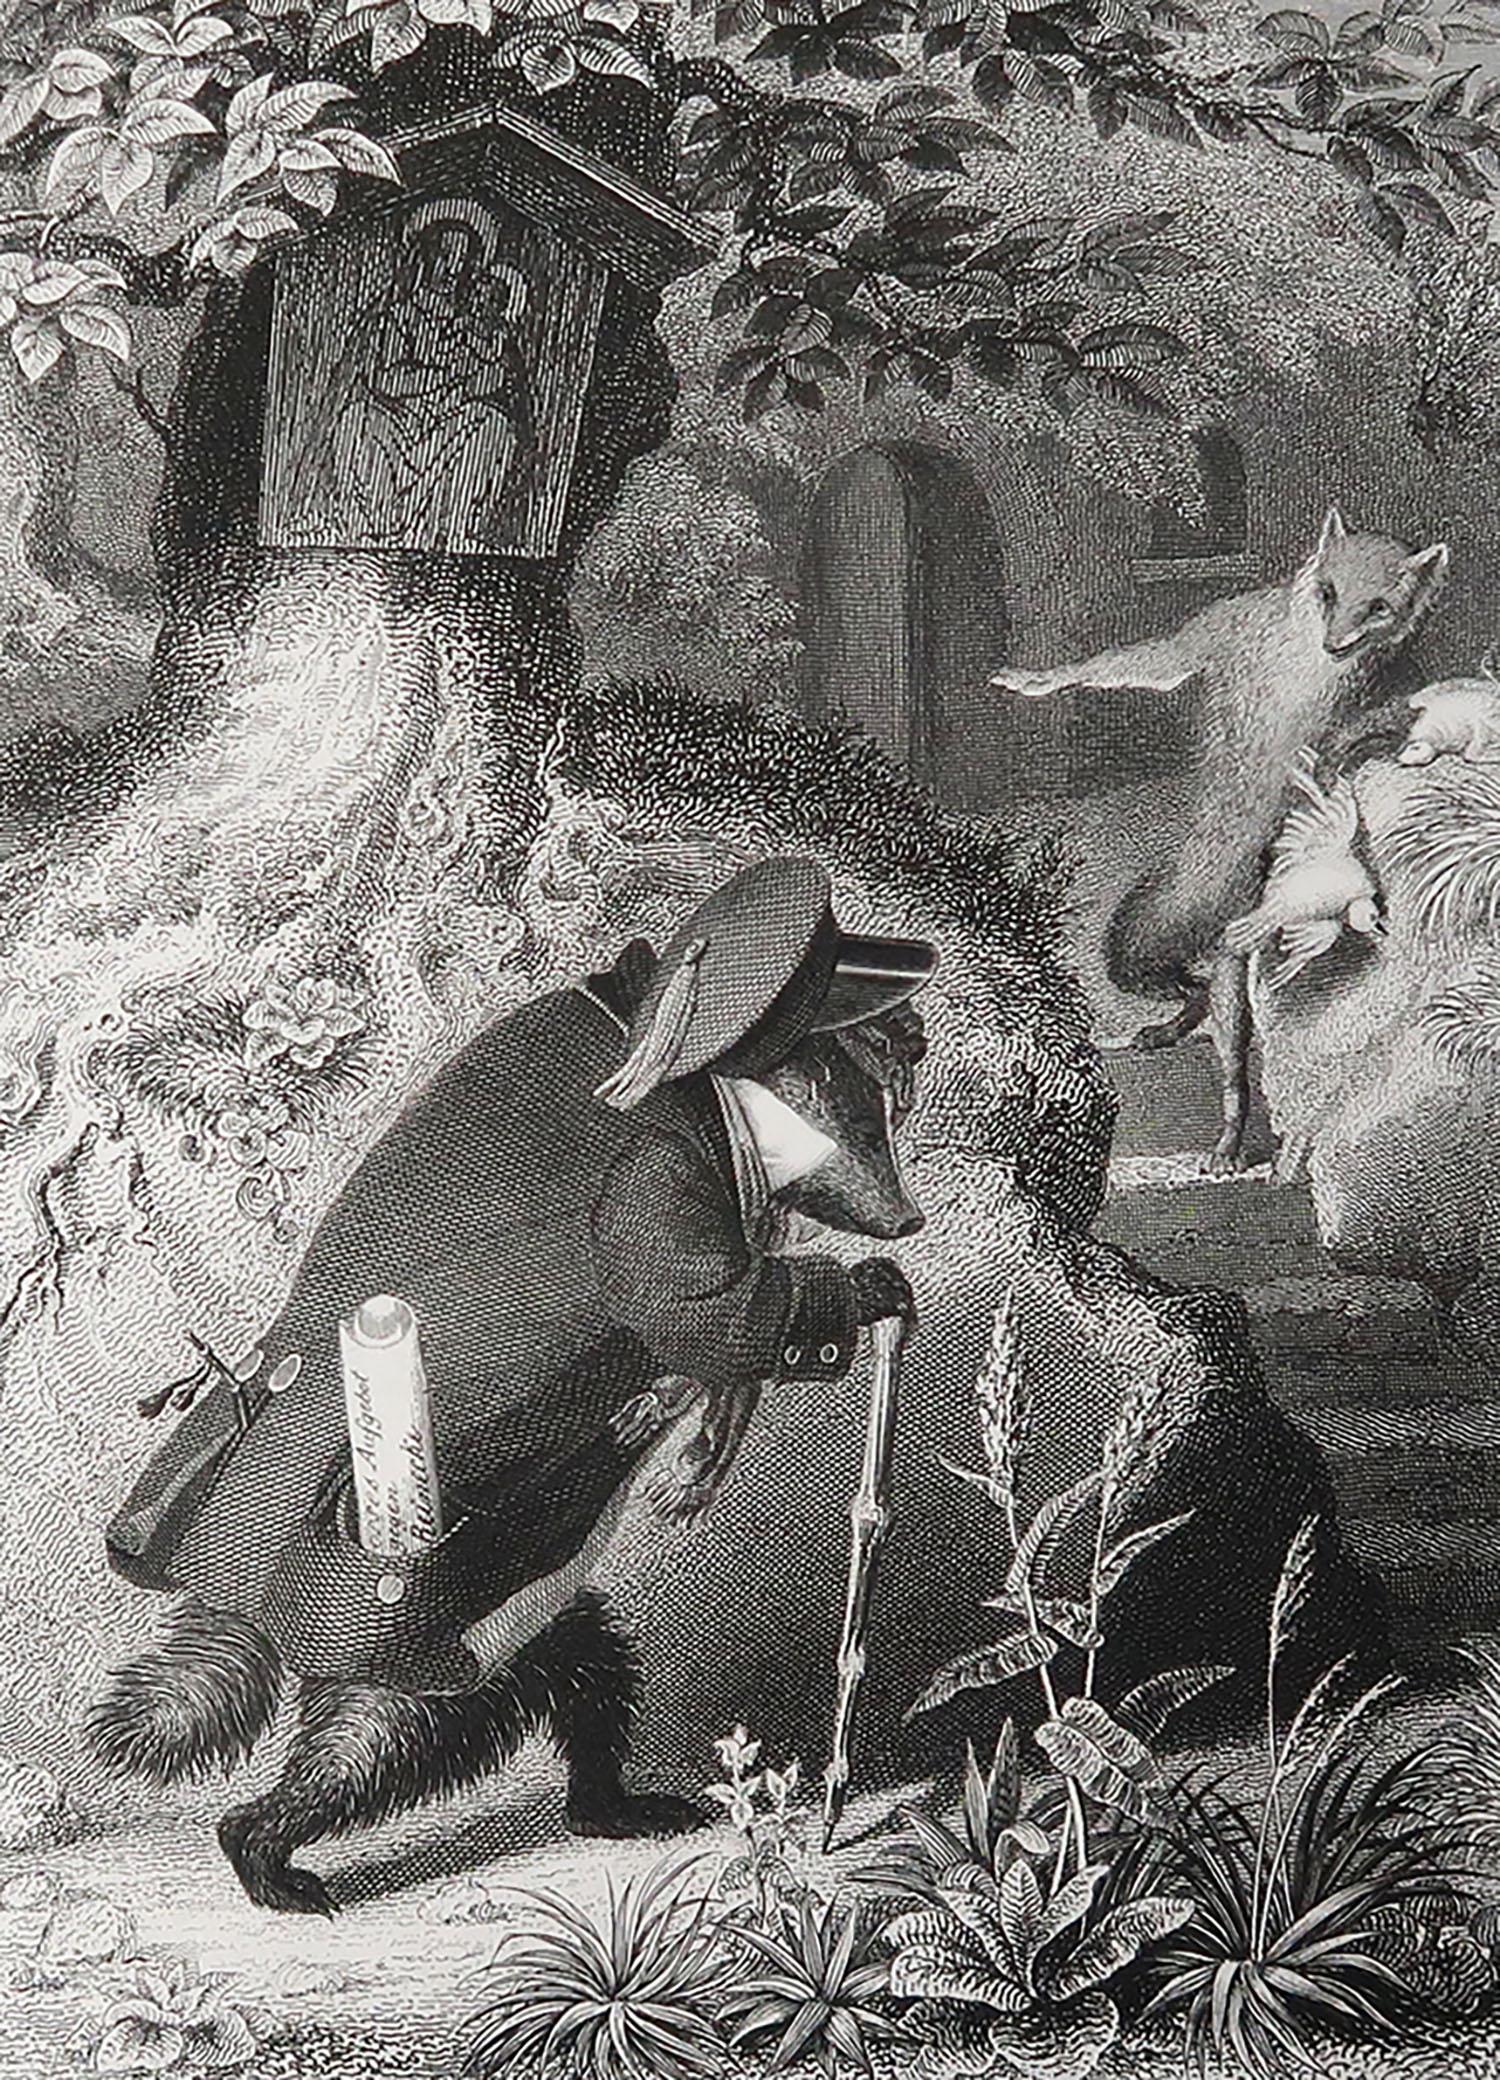 Great image by Heinrich Leutemann.

From the Reynard The Fox series.

Fine steel engraving.

Published by A.H. Payne C.1850

Unframed.

